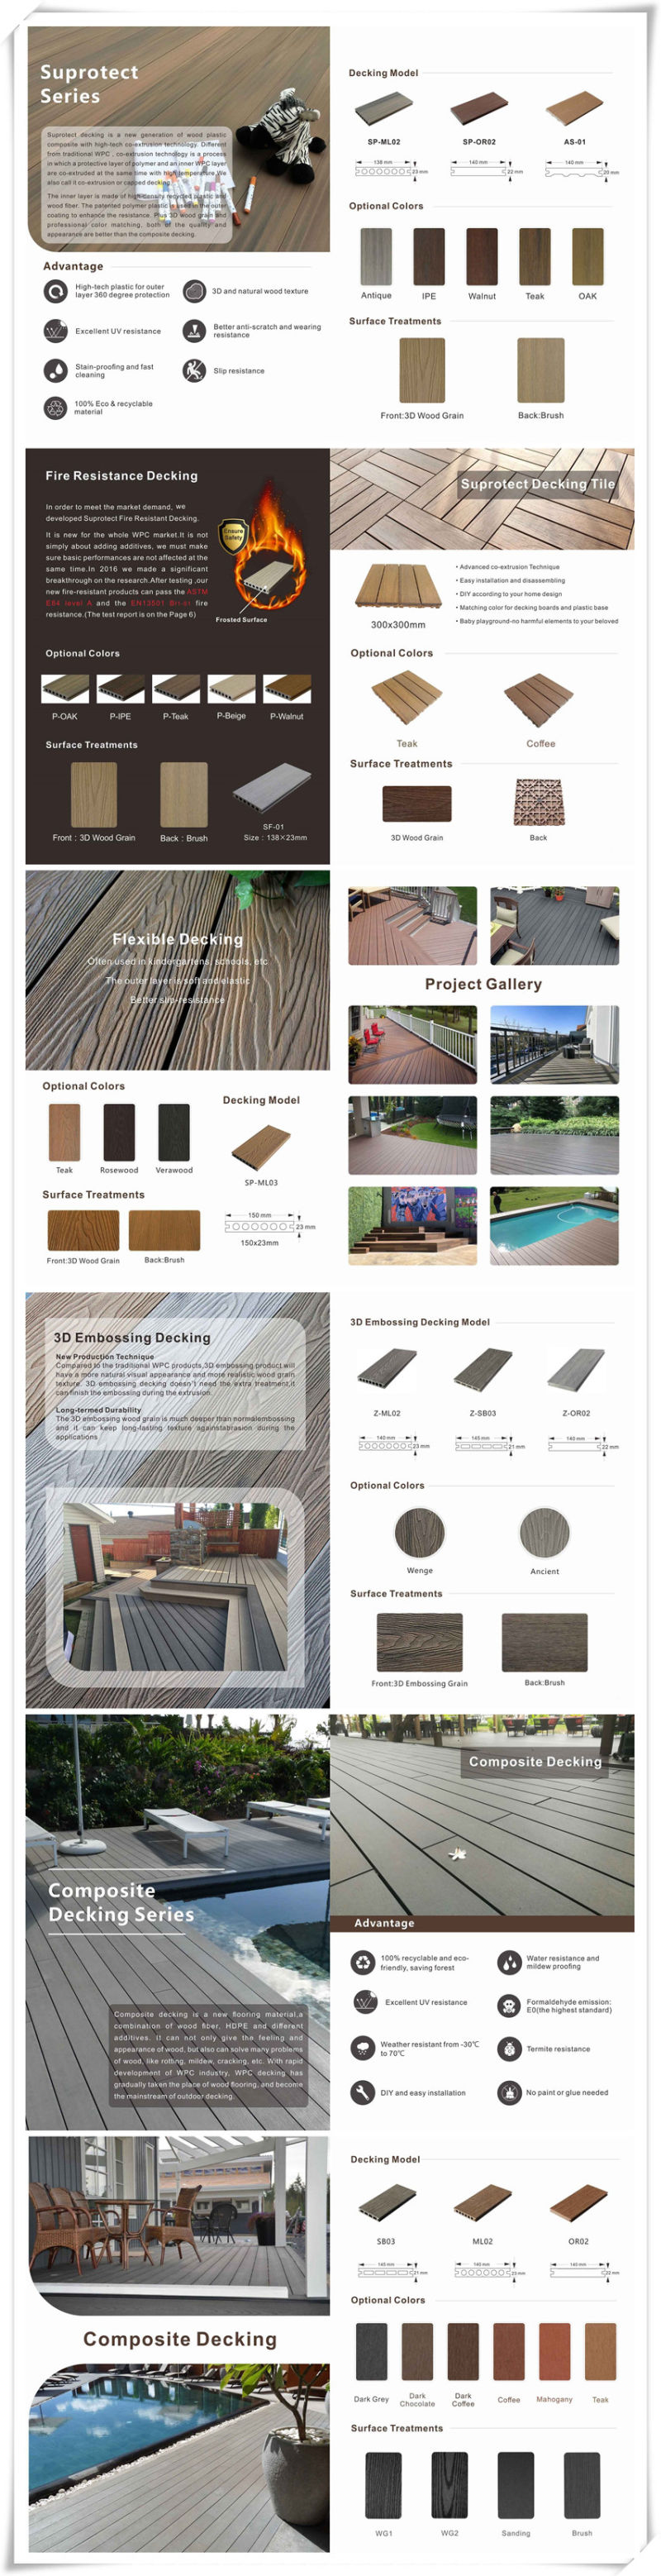 Composite Decking Outdoor WPC Board Swimming Pool Plastic Flooring